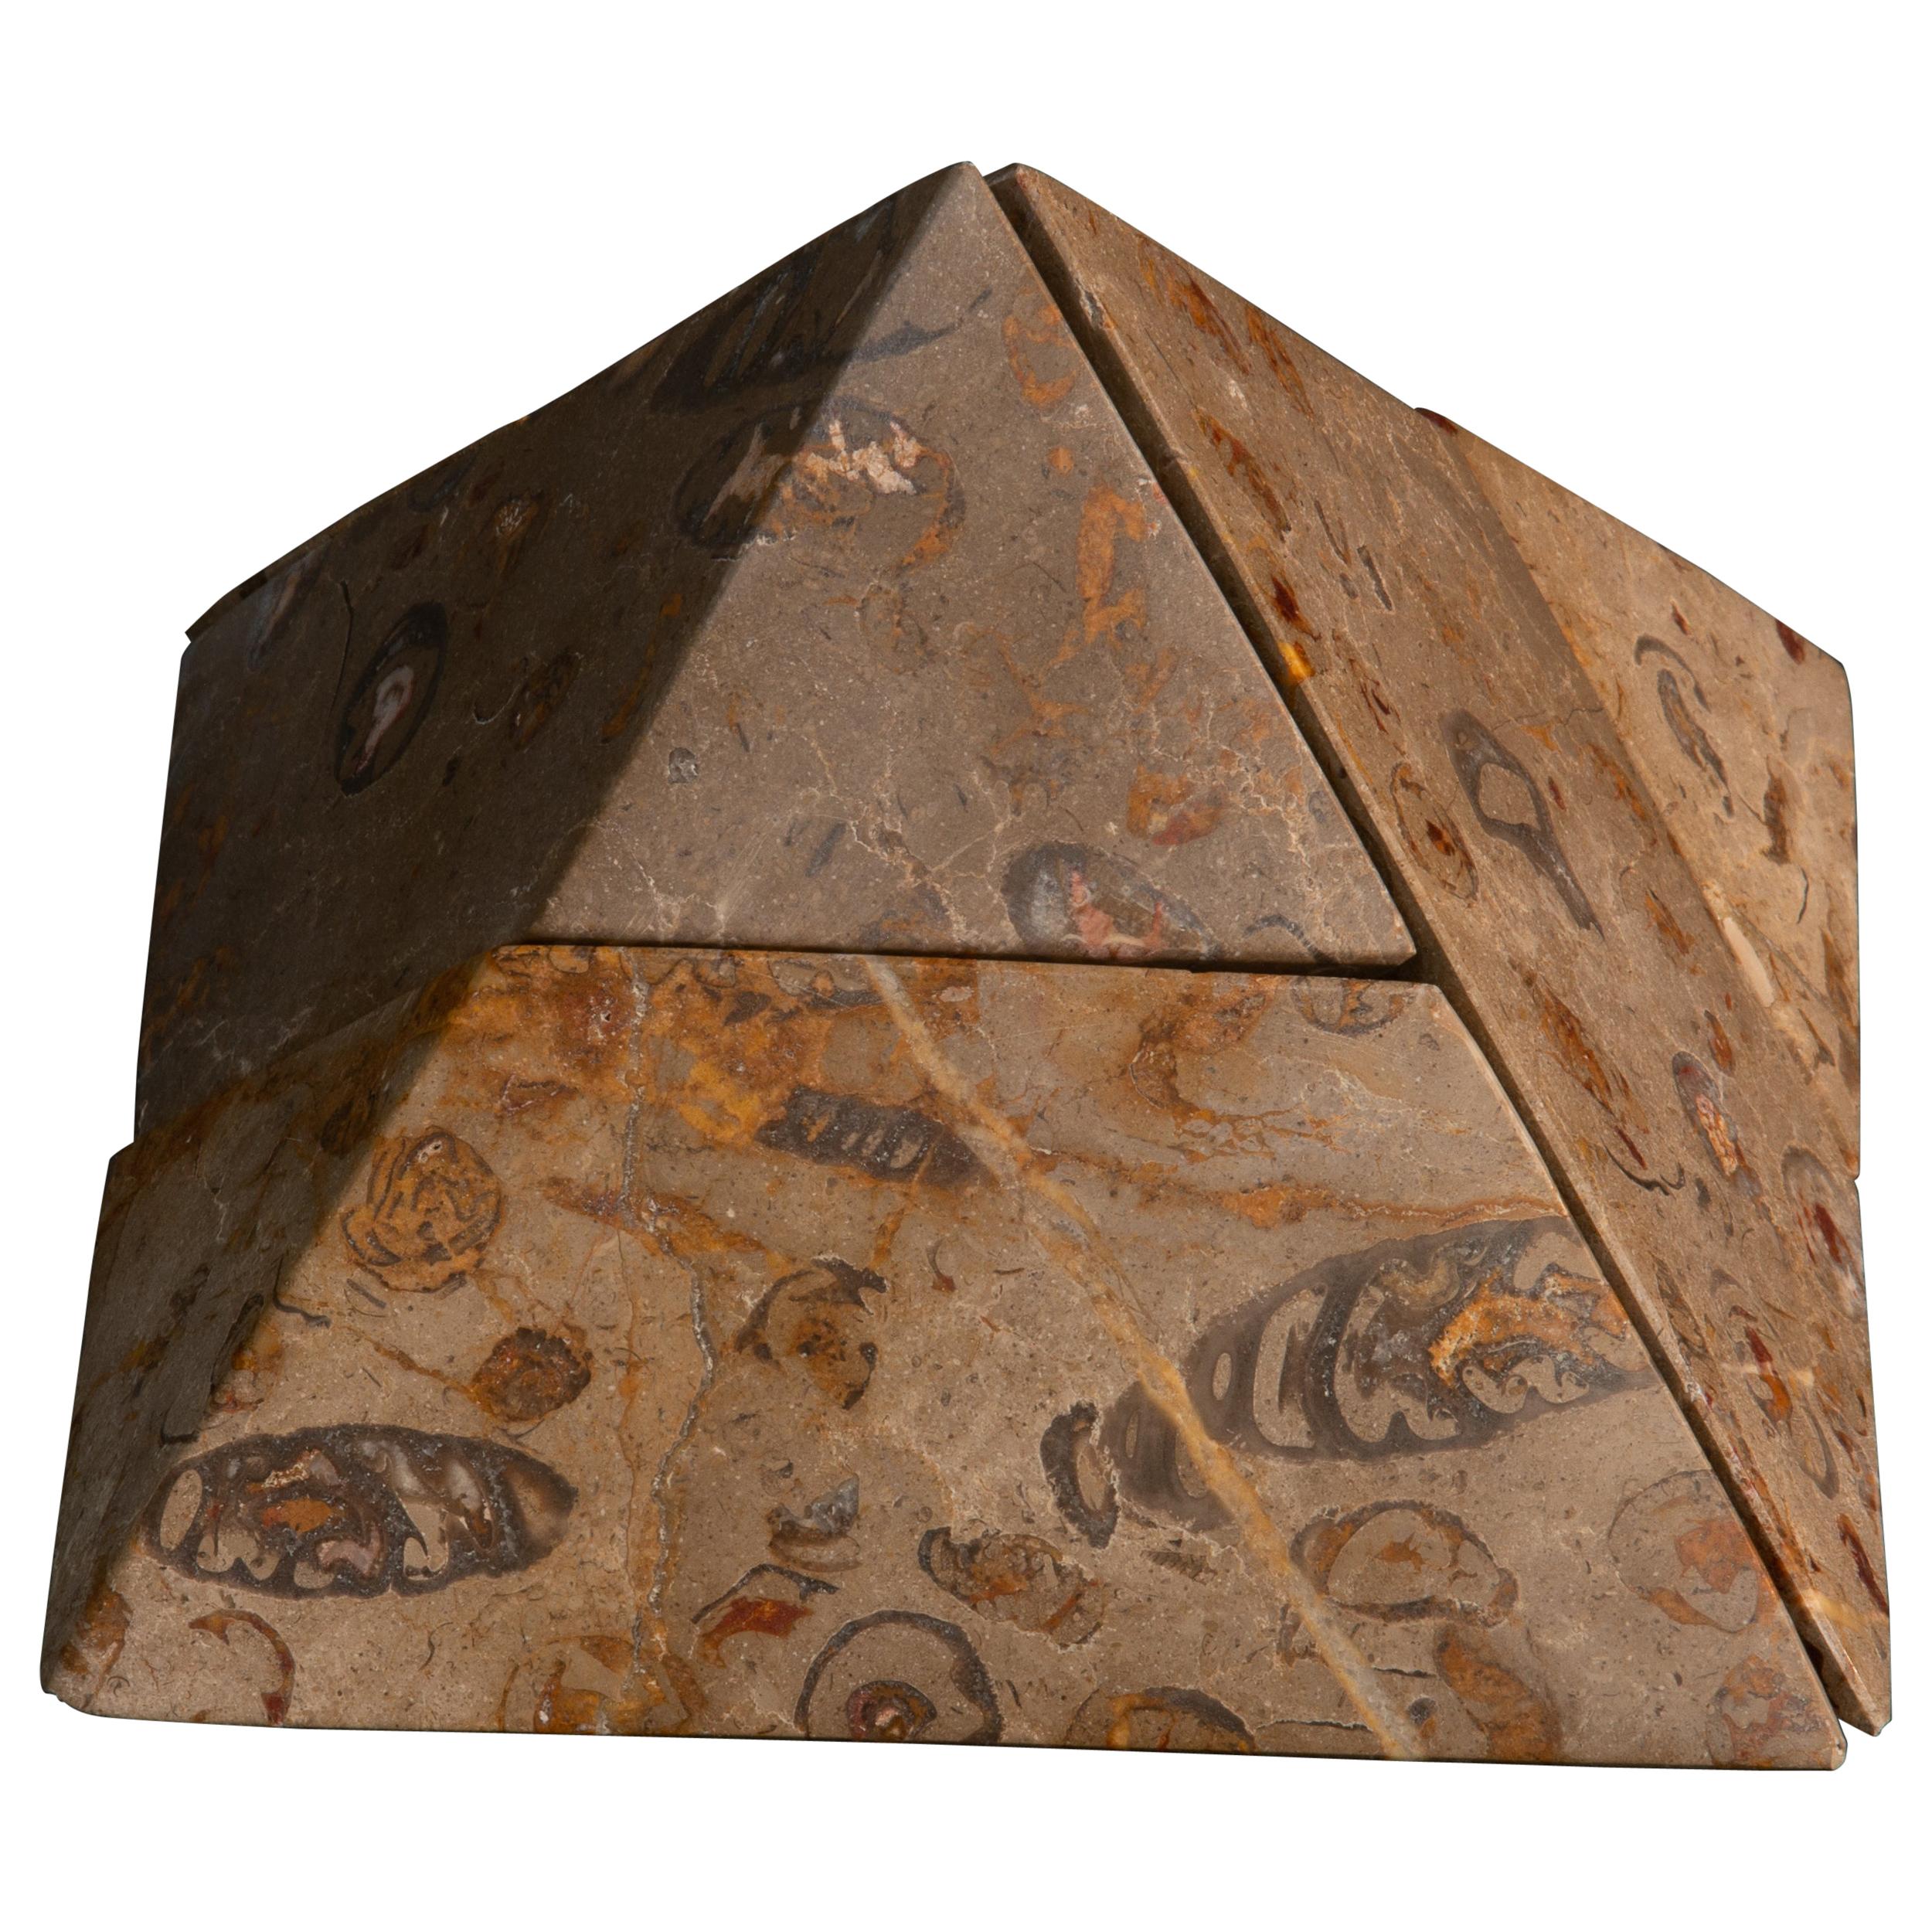 Aina Jurassic Fossil Marble Keops Pyramid Game Sculpture, Living Collection   For Sale